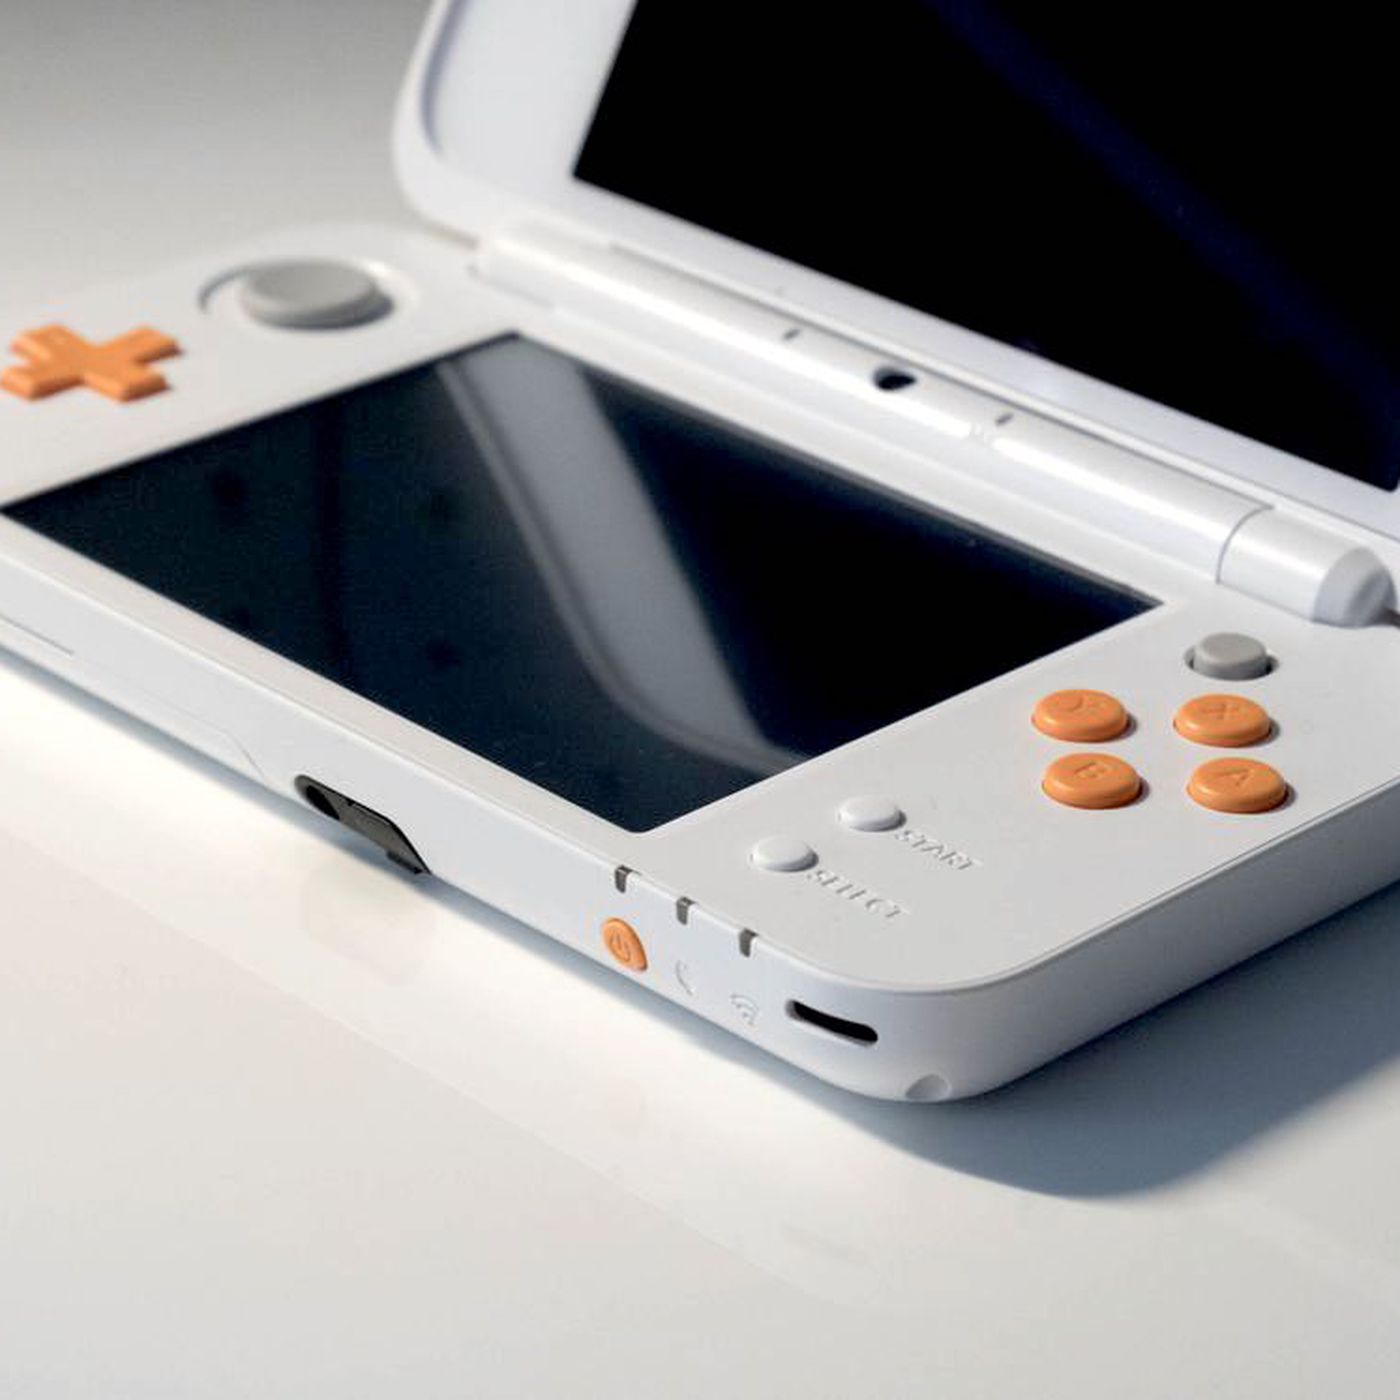 Alice Ordliste overholdelse Nintendo has discontinued the 3DS - The Verge